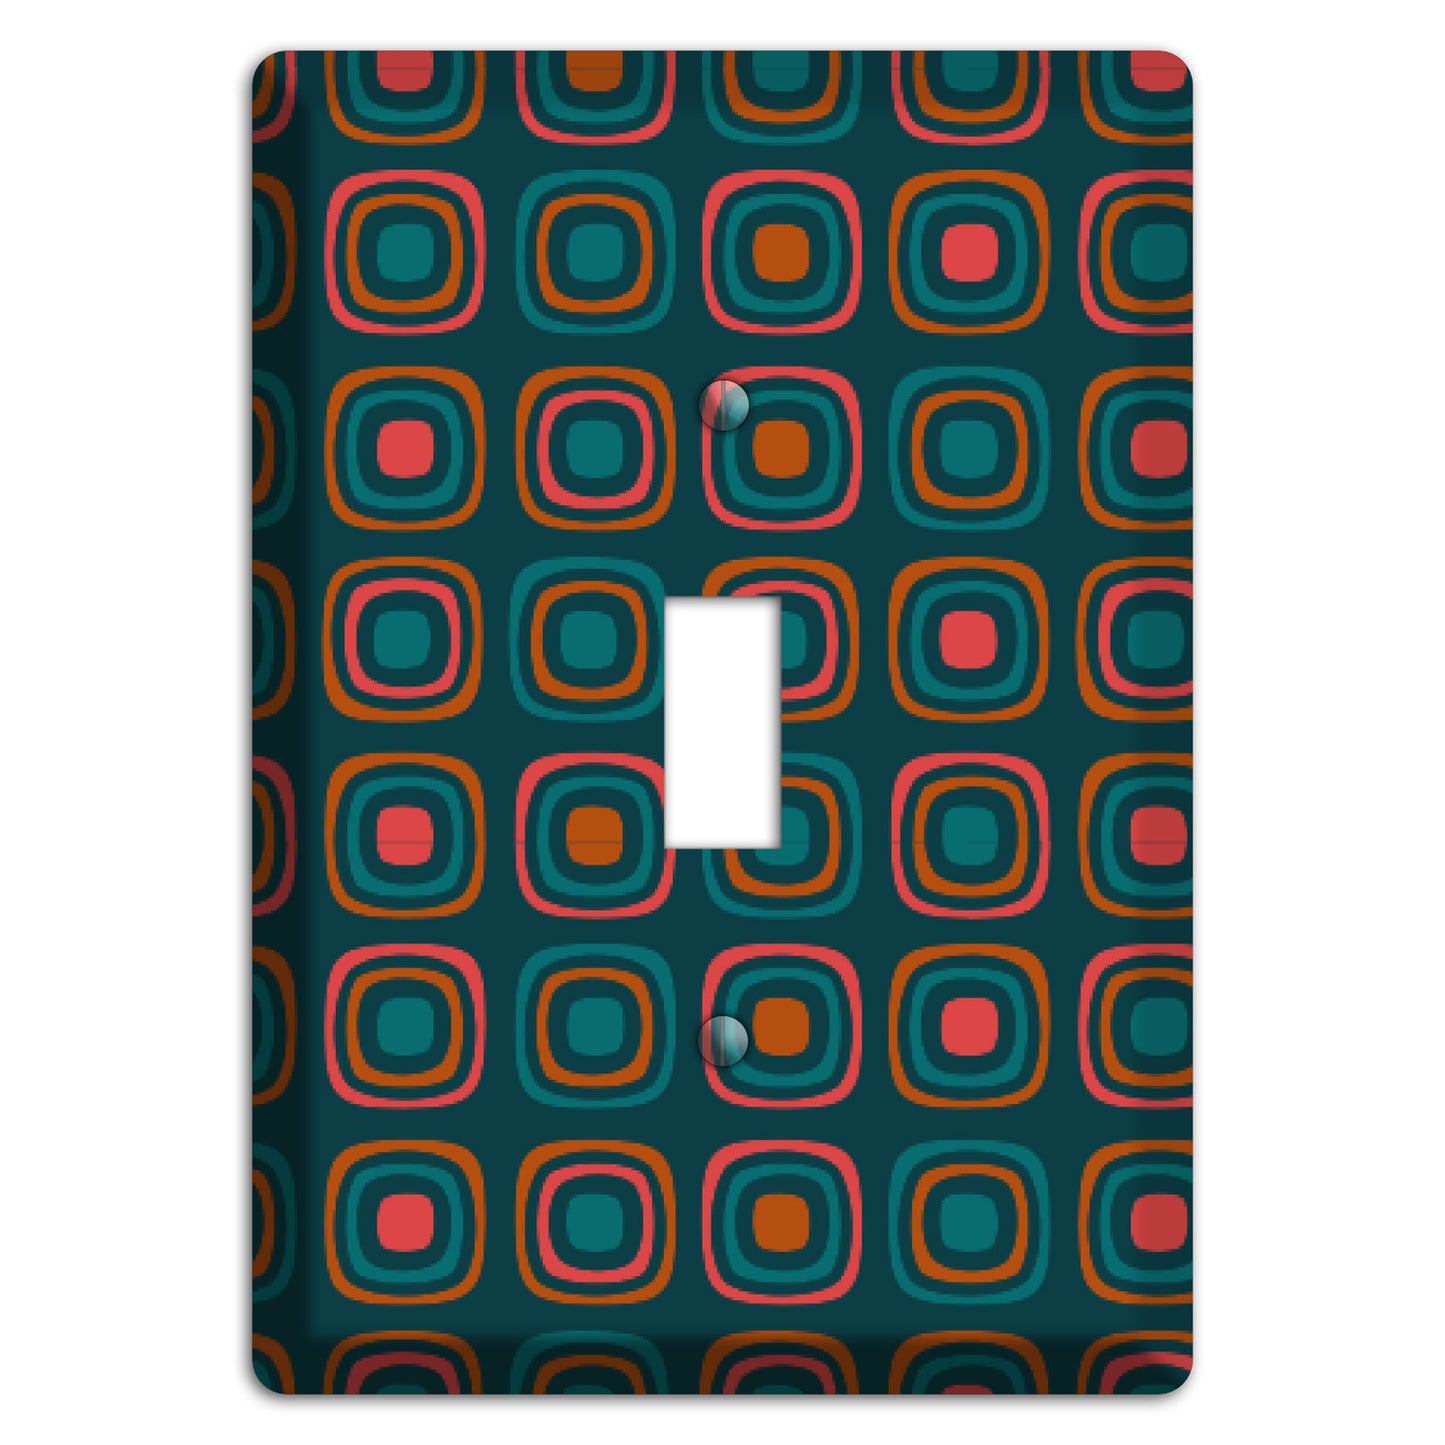 Teal and Pink Rounded Squares Cover Plates